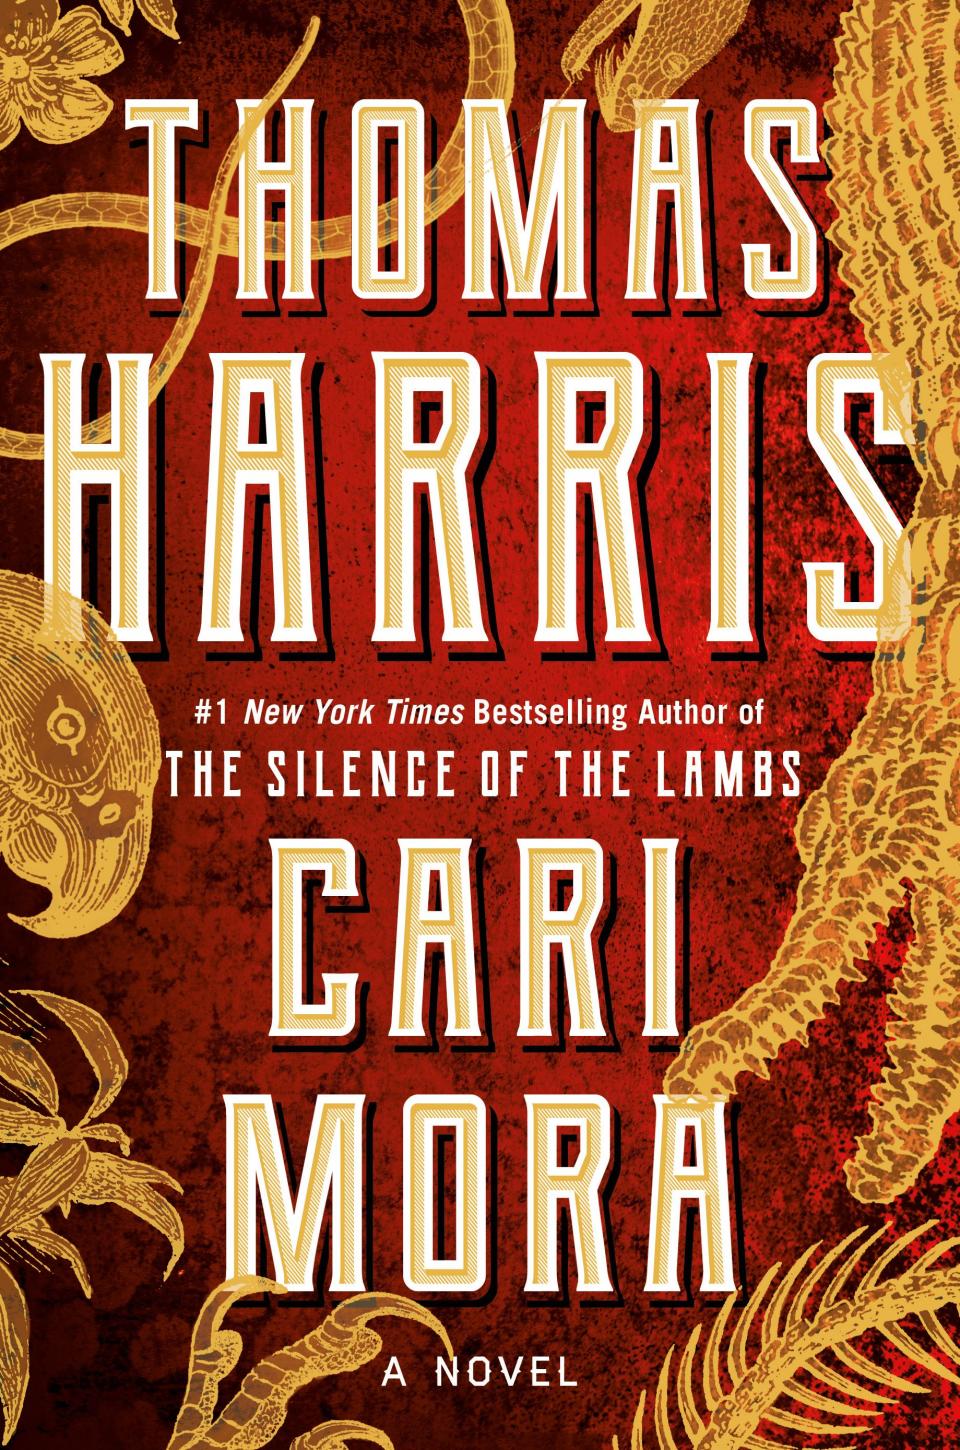 The creator of Hannibal Lecter has written a fiendish new serial killer who preys on women and harvests their organs in twisted thriller "Cari Mora."